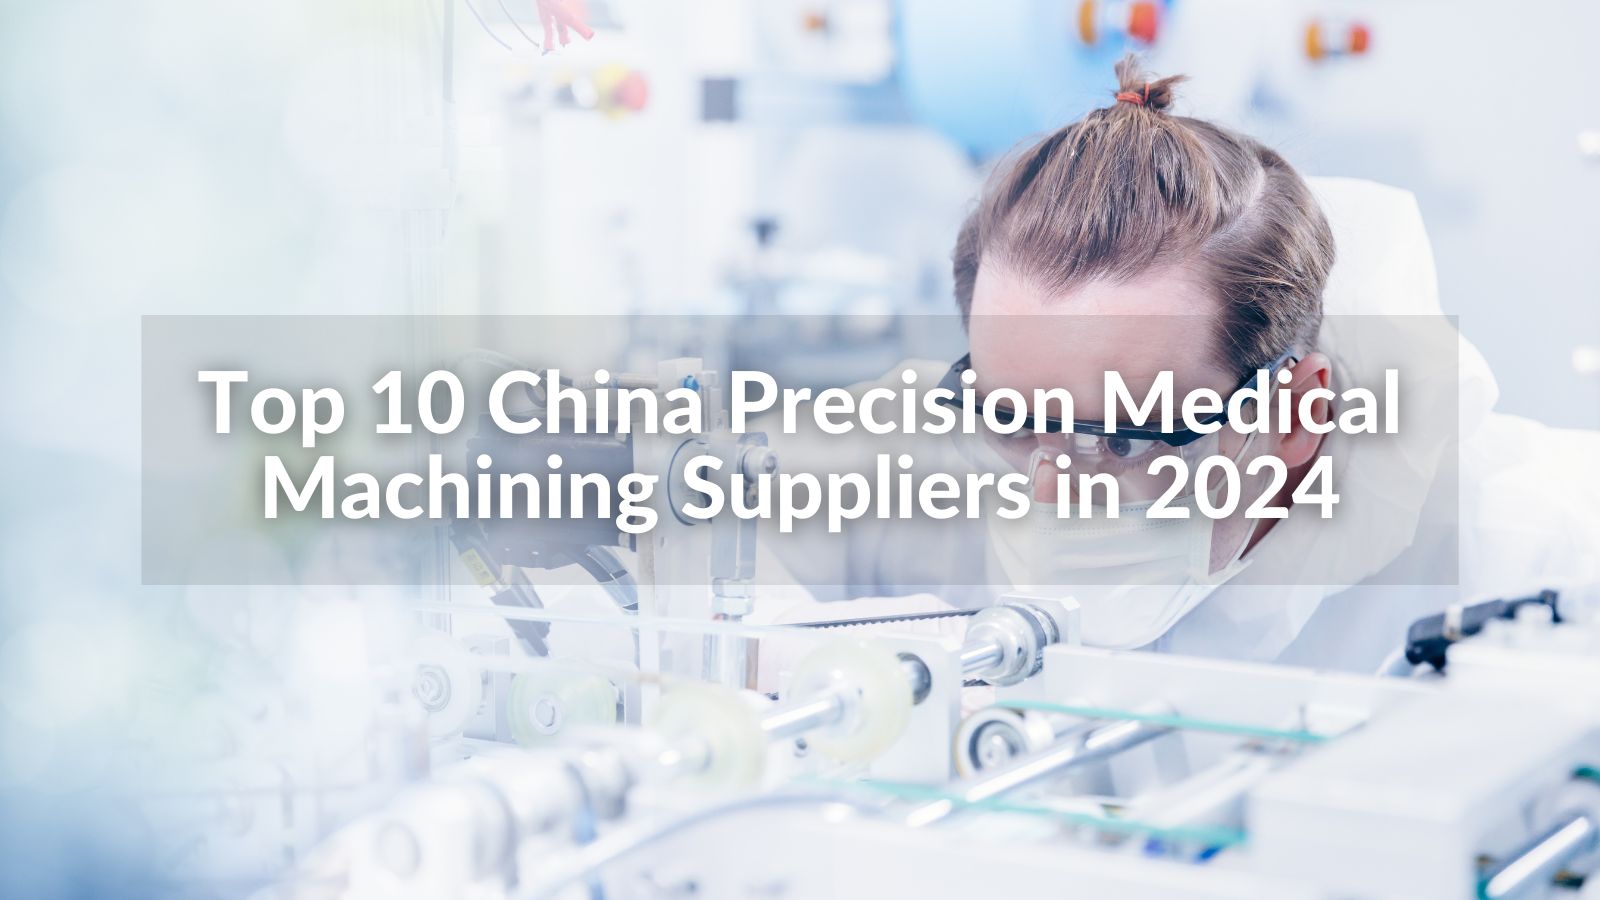 Top 10 China Precision Medical Machining Suppliers in 2024